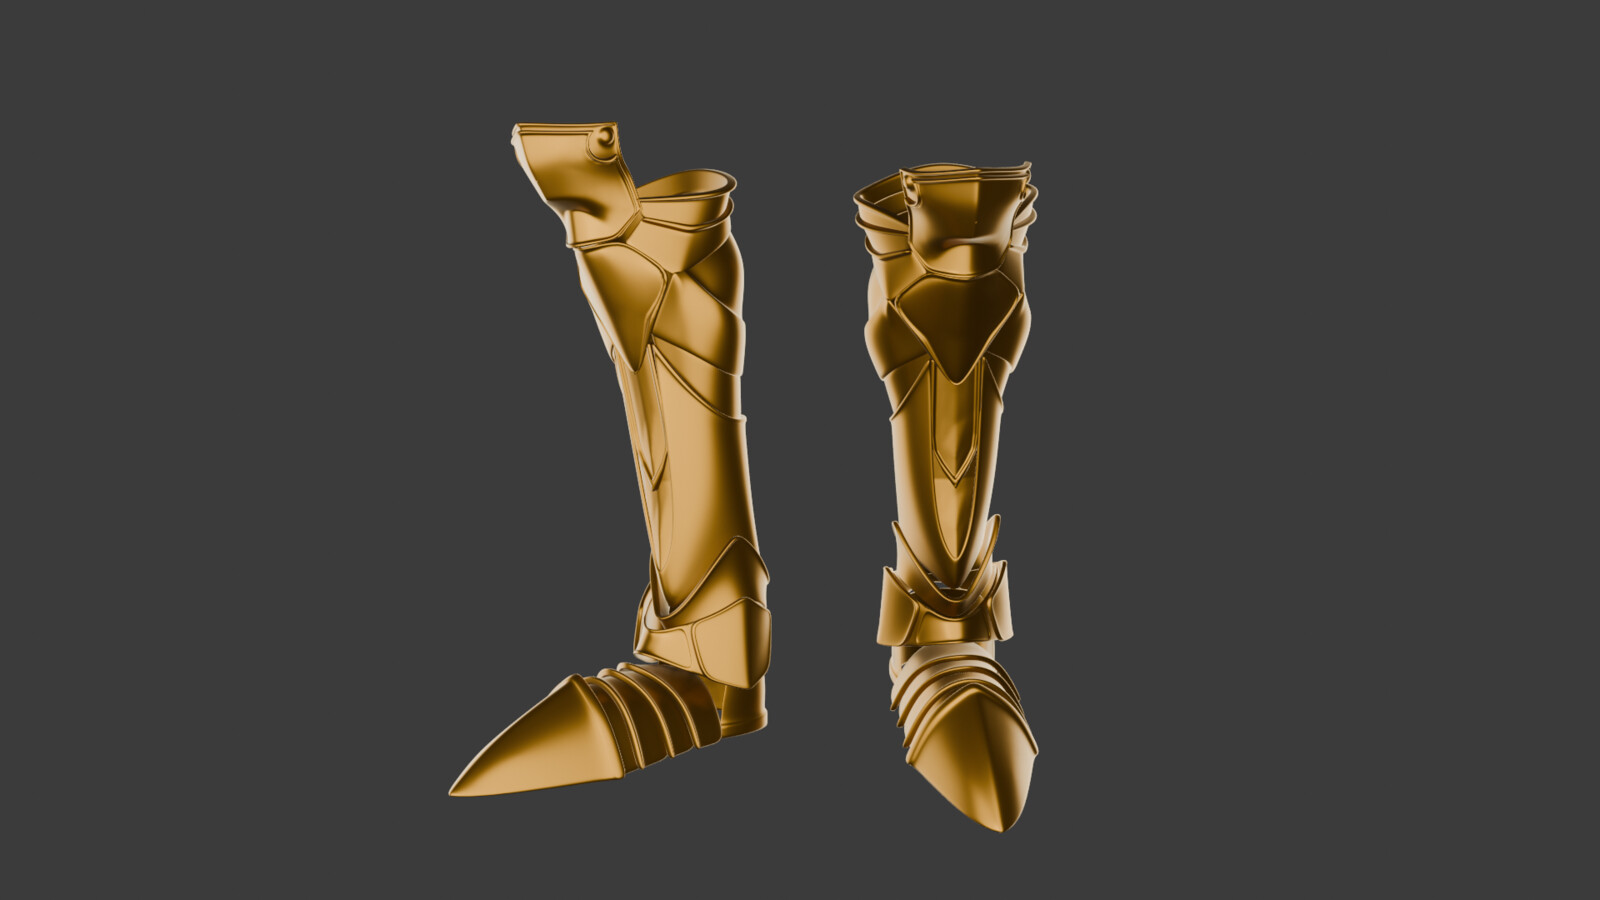 Final render of boots with basic texturing to bring out details